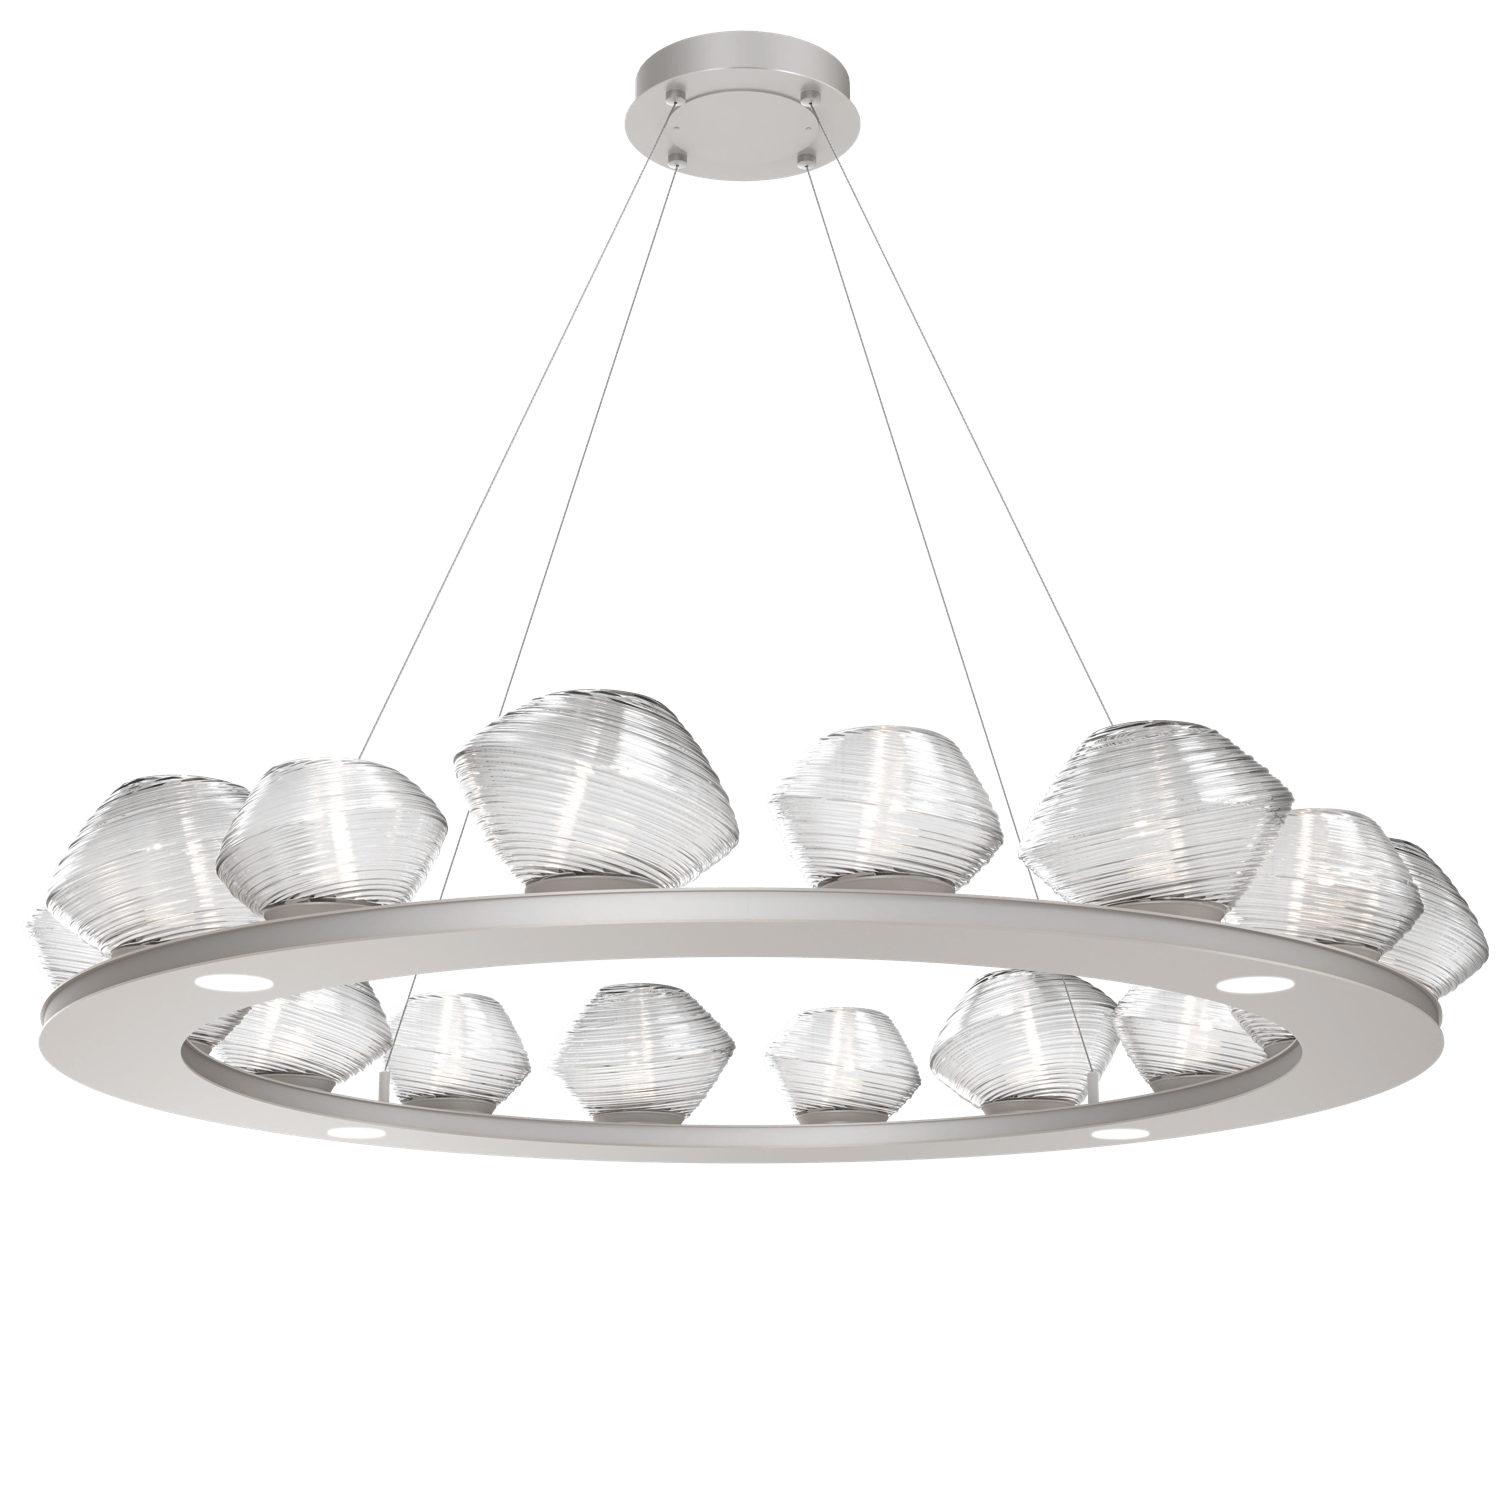 CHB0089-0D-BS-C-Hammerton-Studio-Mesa-48-inch-ring-chandelier-with-metallic-beige-silver-finish-and-clear-blown-glass-shades-and-LED-lamping